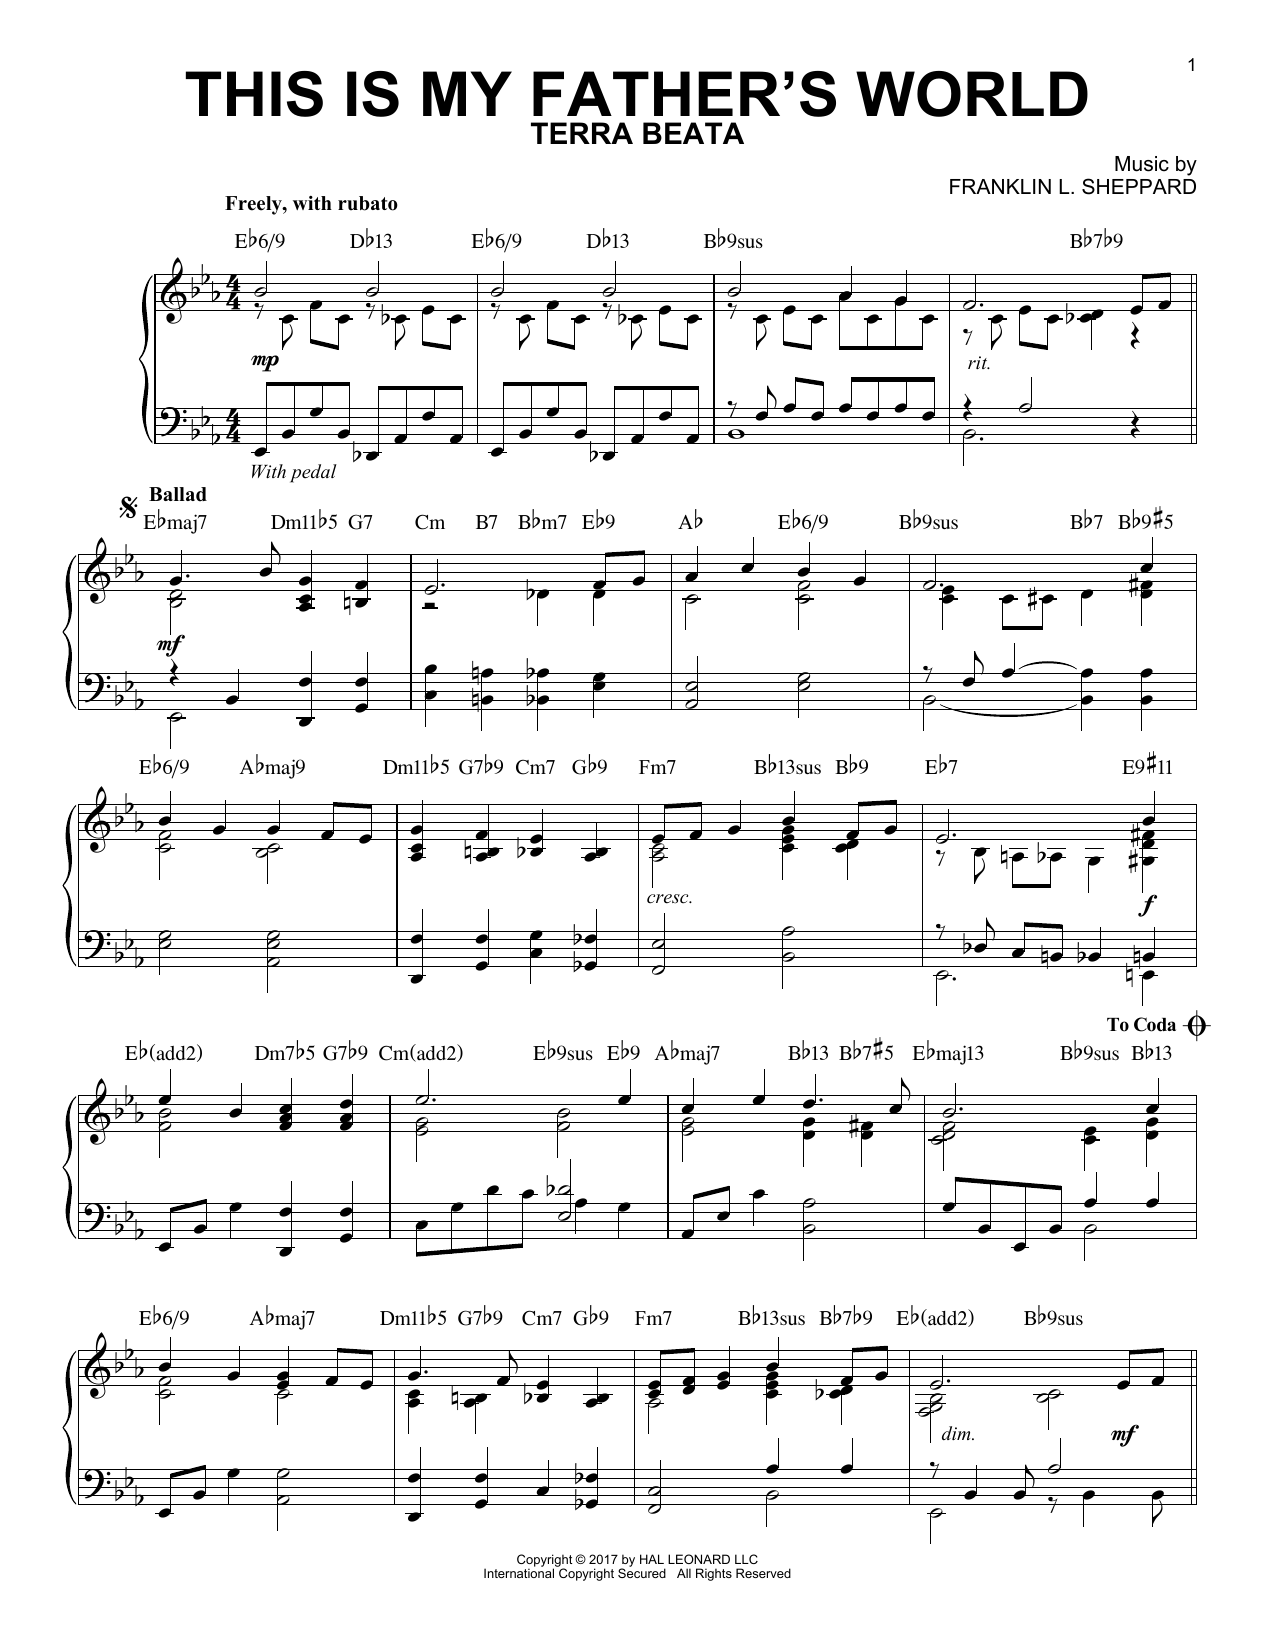 This Is My Father's World [Jazz version] sheet music